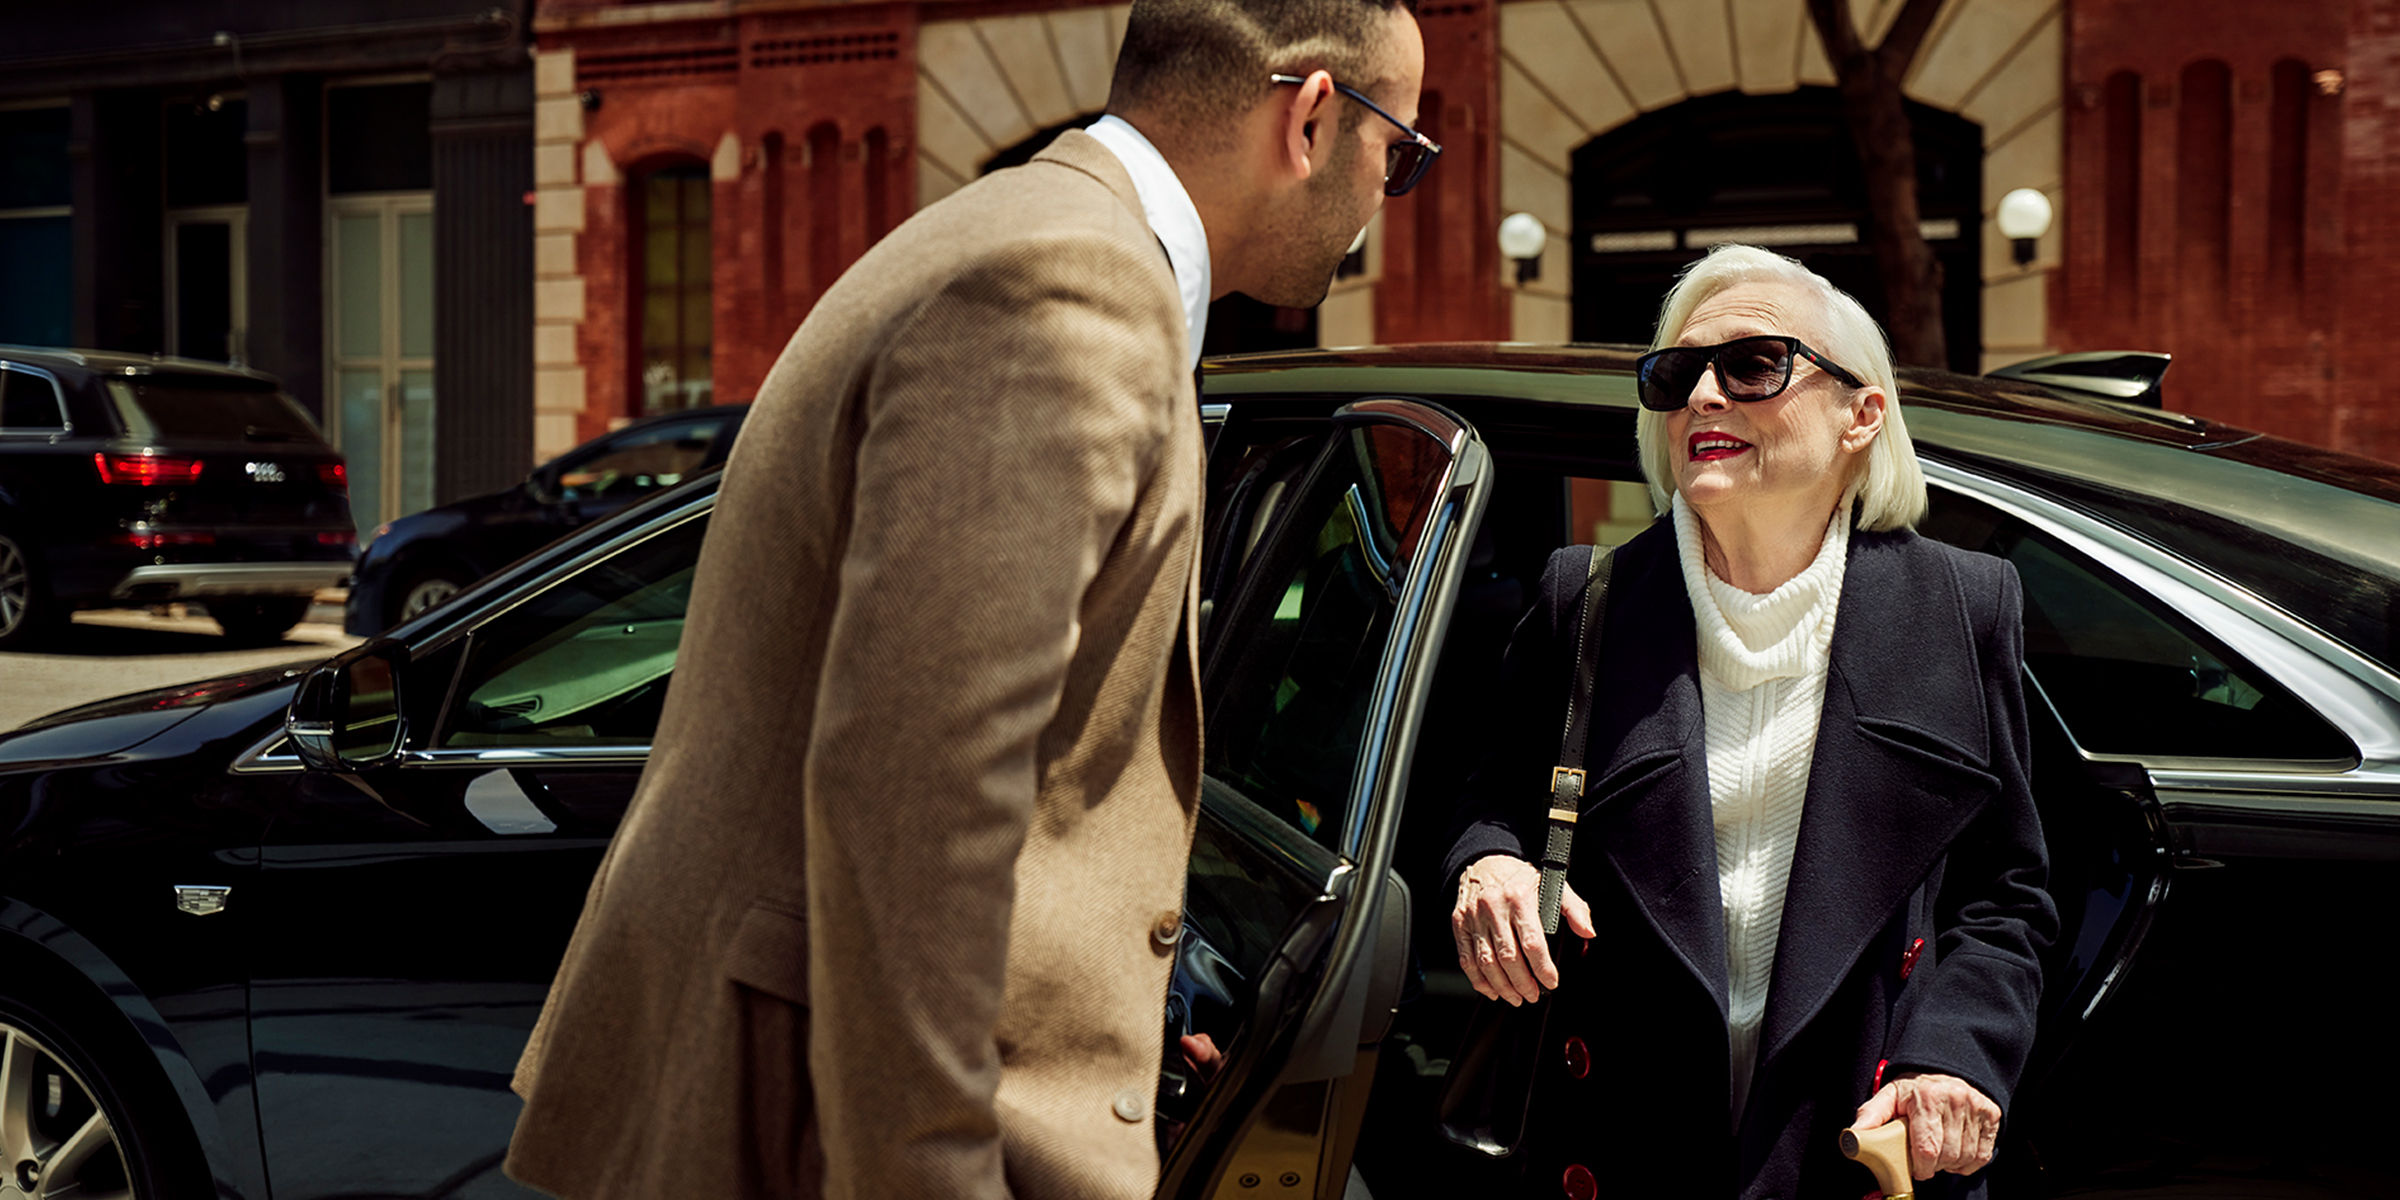 Chauffeur opening a car door for a stylish older woman with a cane